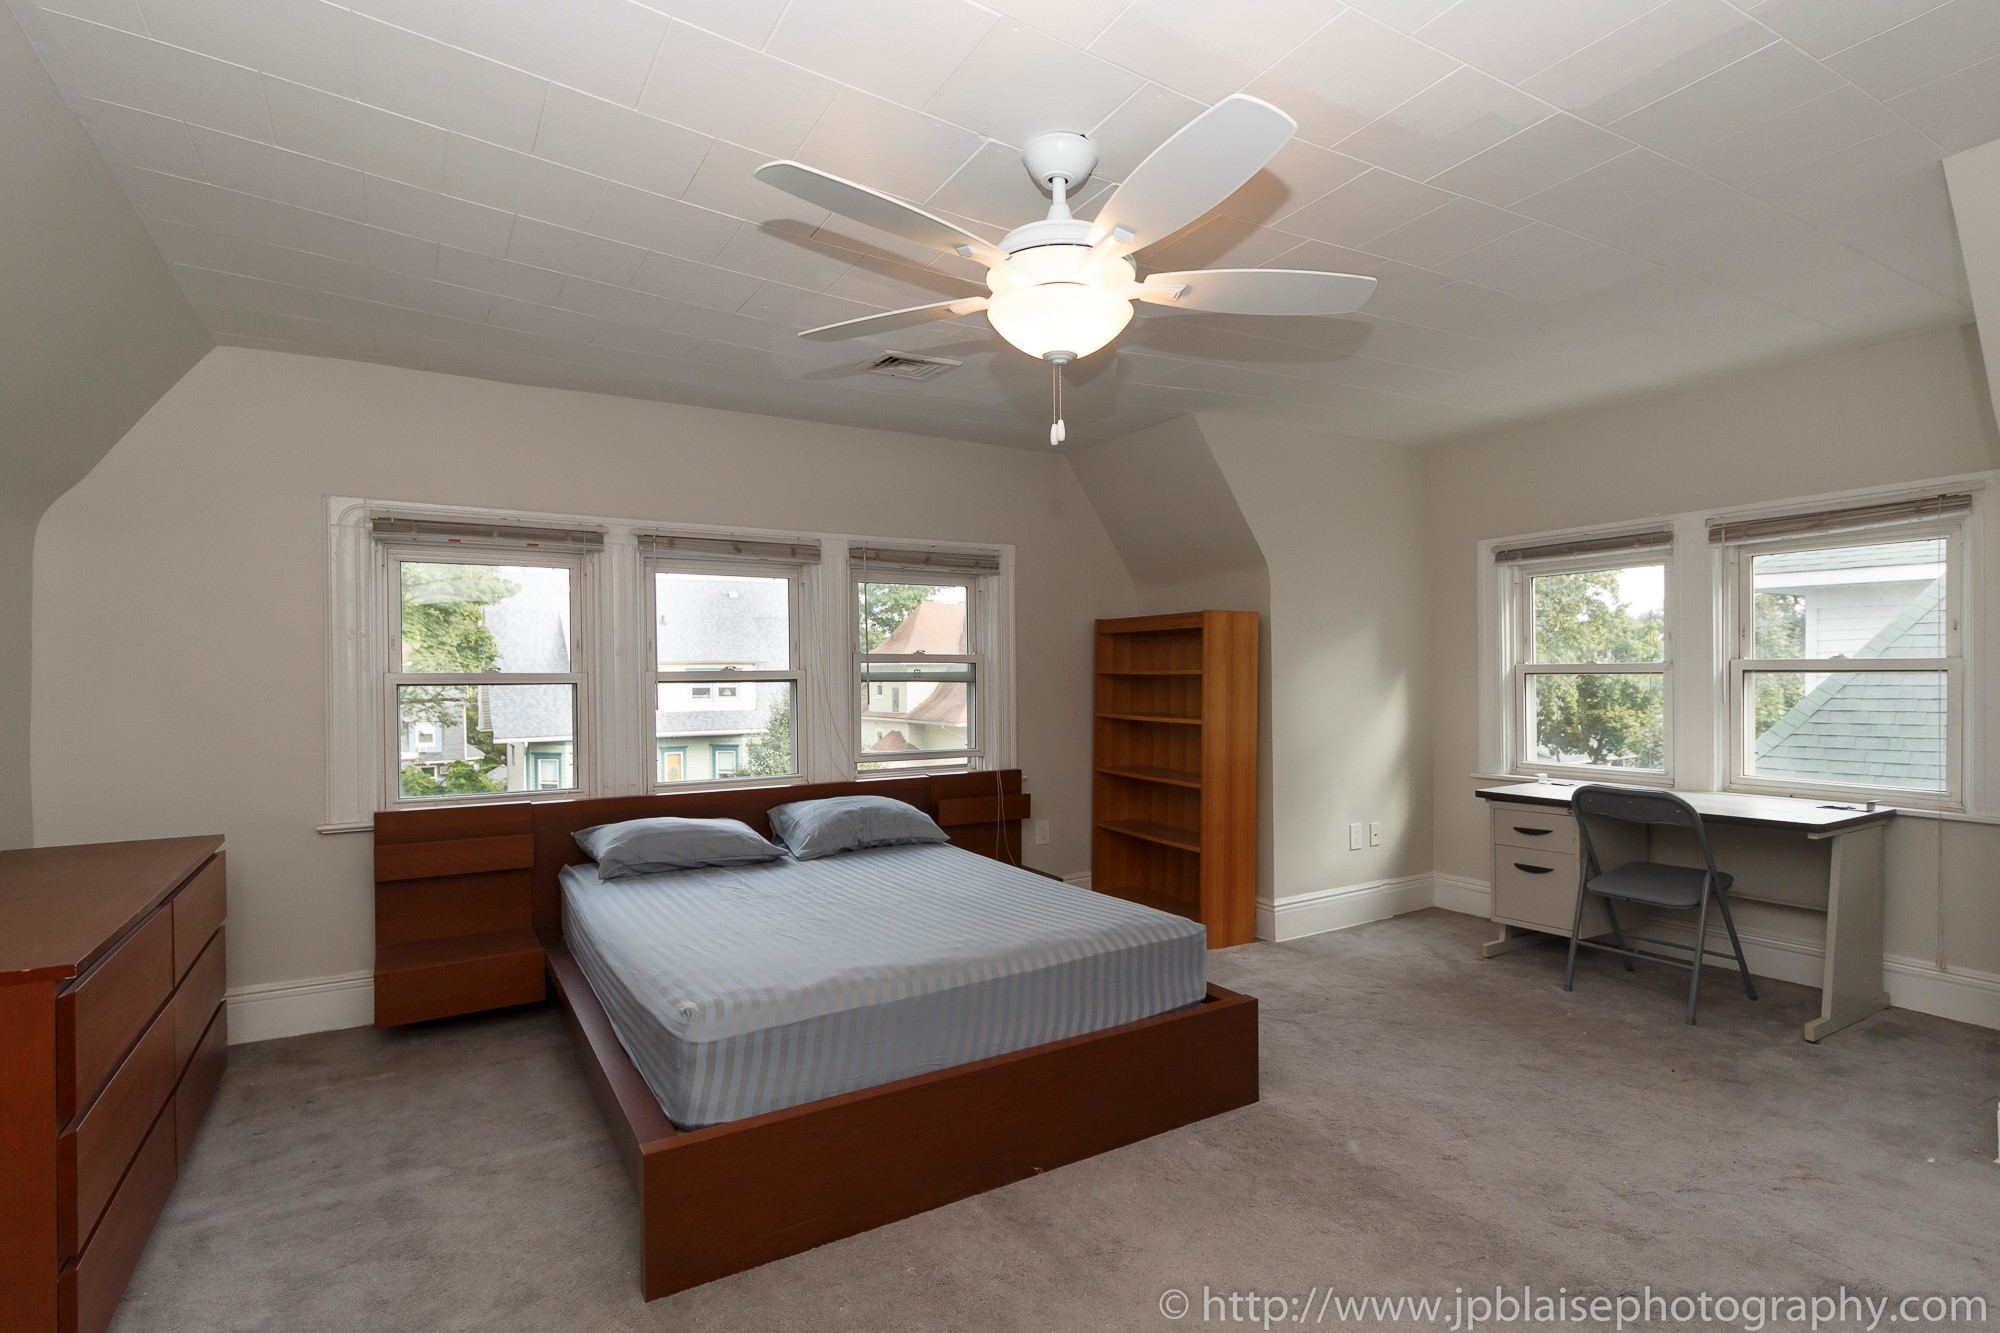 New york apartment photographer work House for sale Flatbush Brooklyn ny interior real estate photography master bedroom